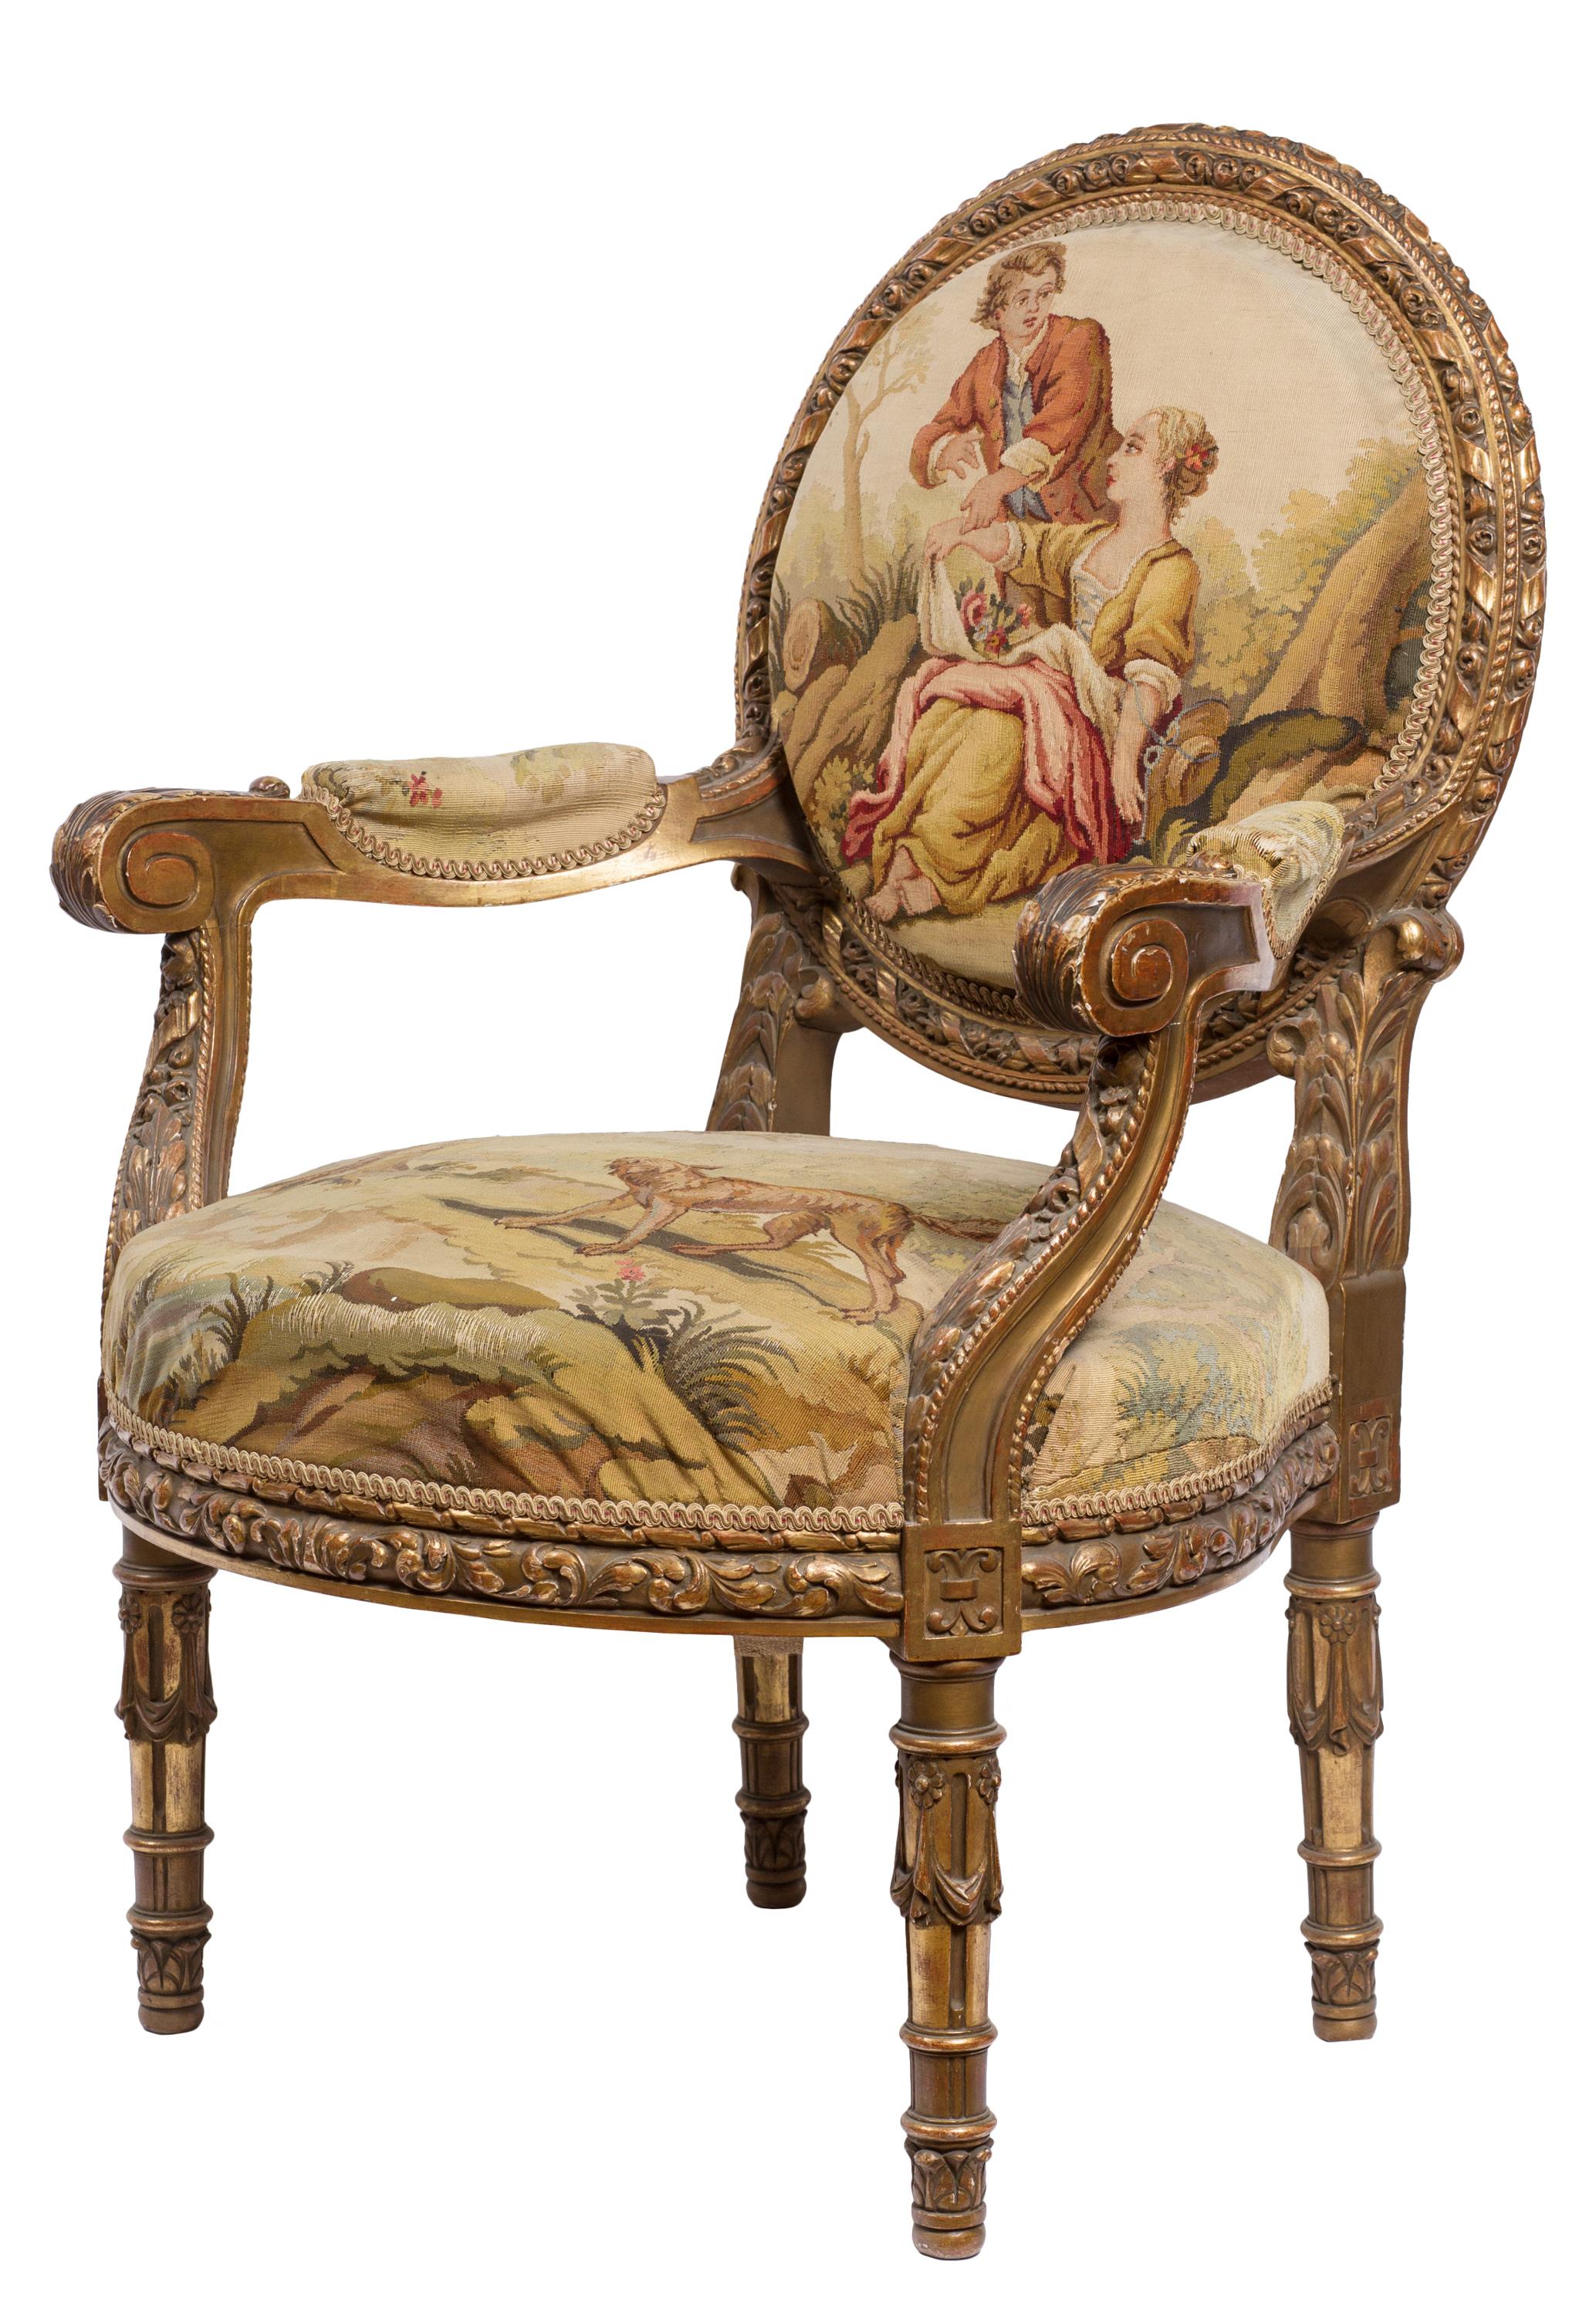 19th C. French 3 Piece Giltwood Salon Suite, Settee, Pair Armchairs, Tapestry For Sale 4